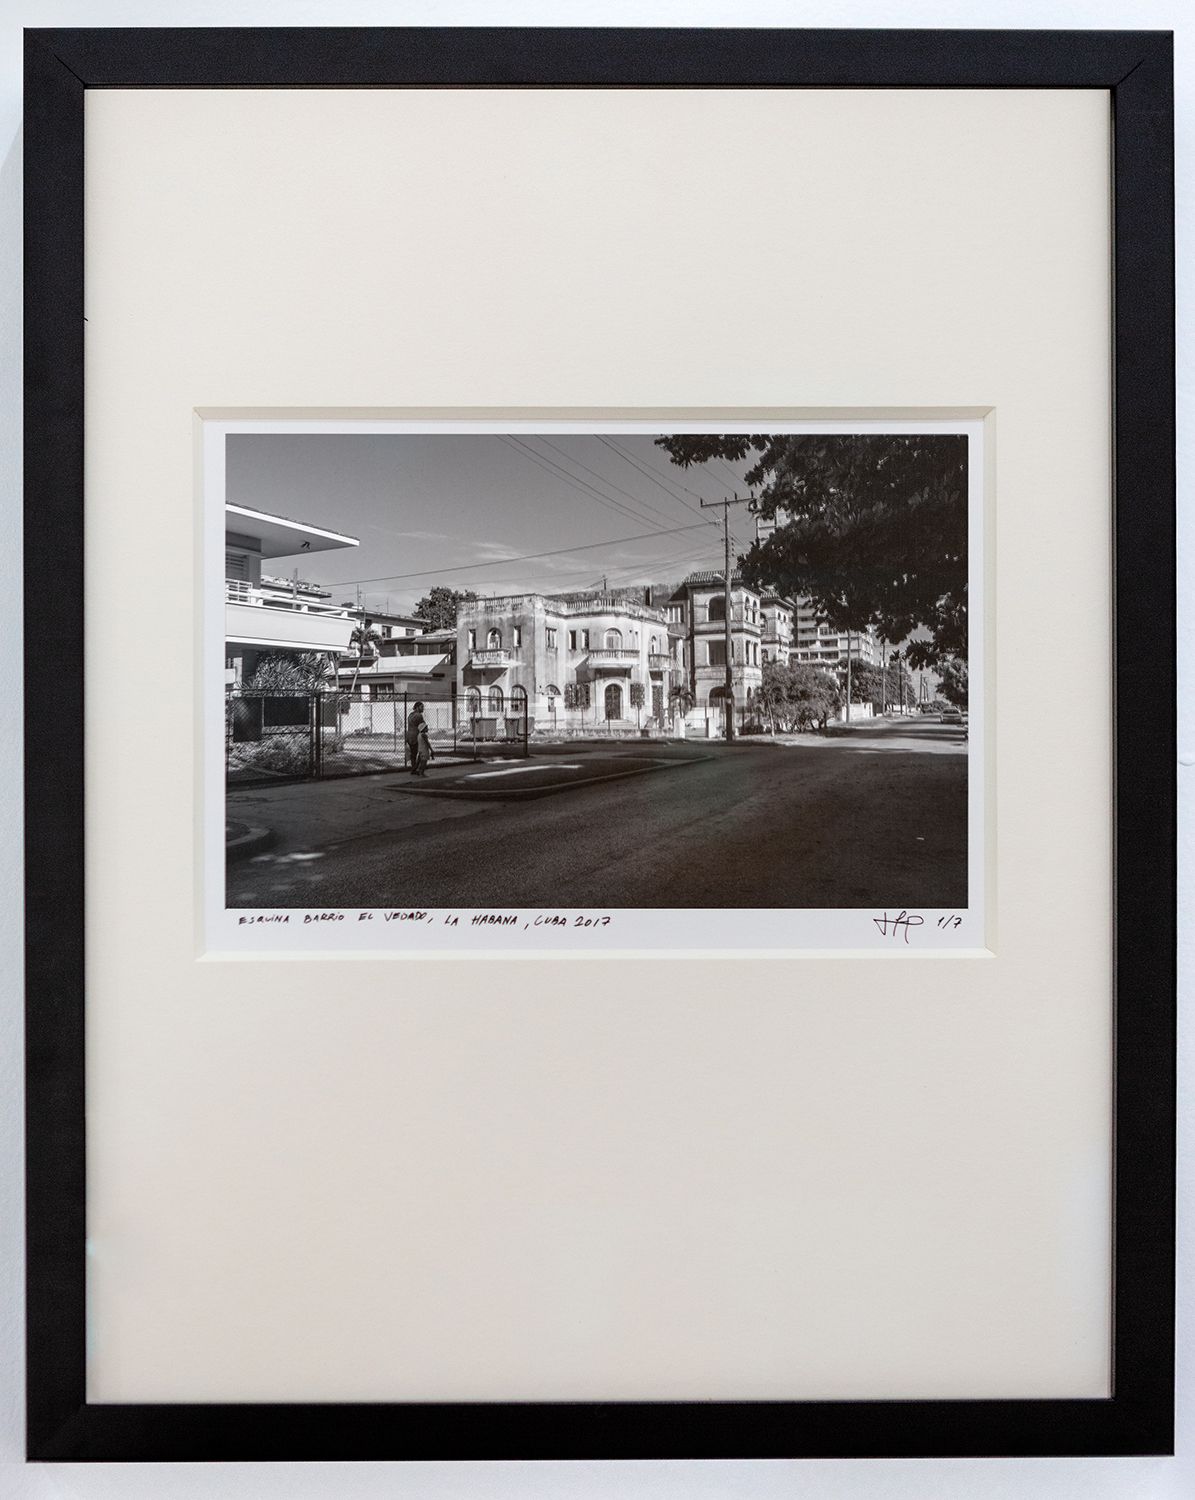   Esquina Vedado,  2017 Archival cotton print with museum glass 13 x 17 inches Edition 1 of 7, 2 AP 